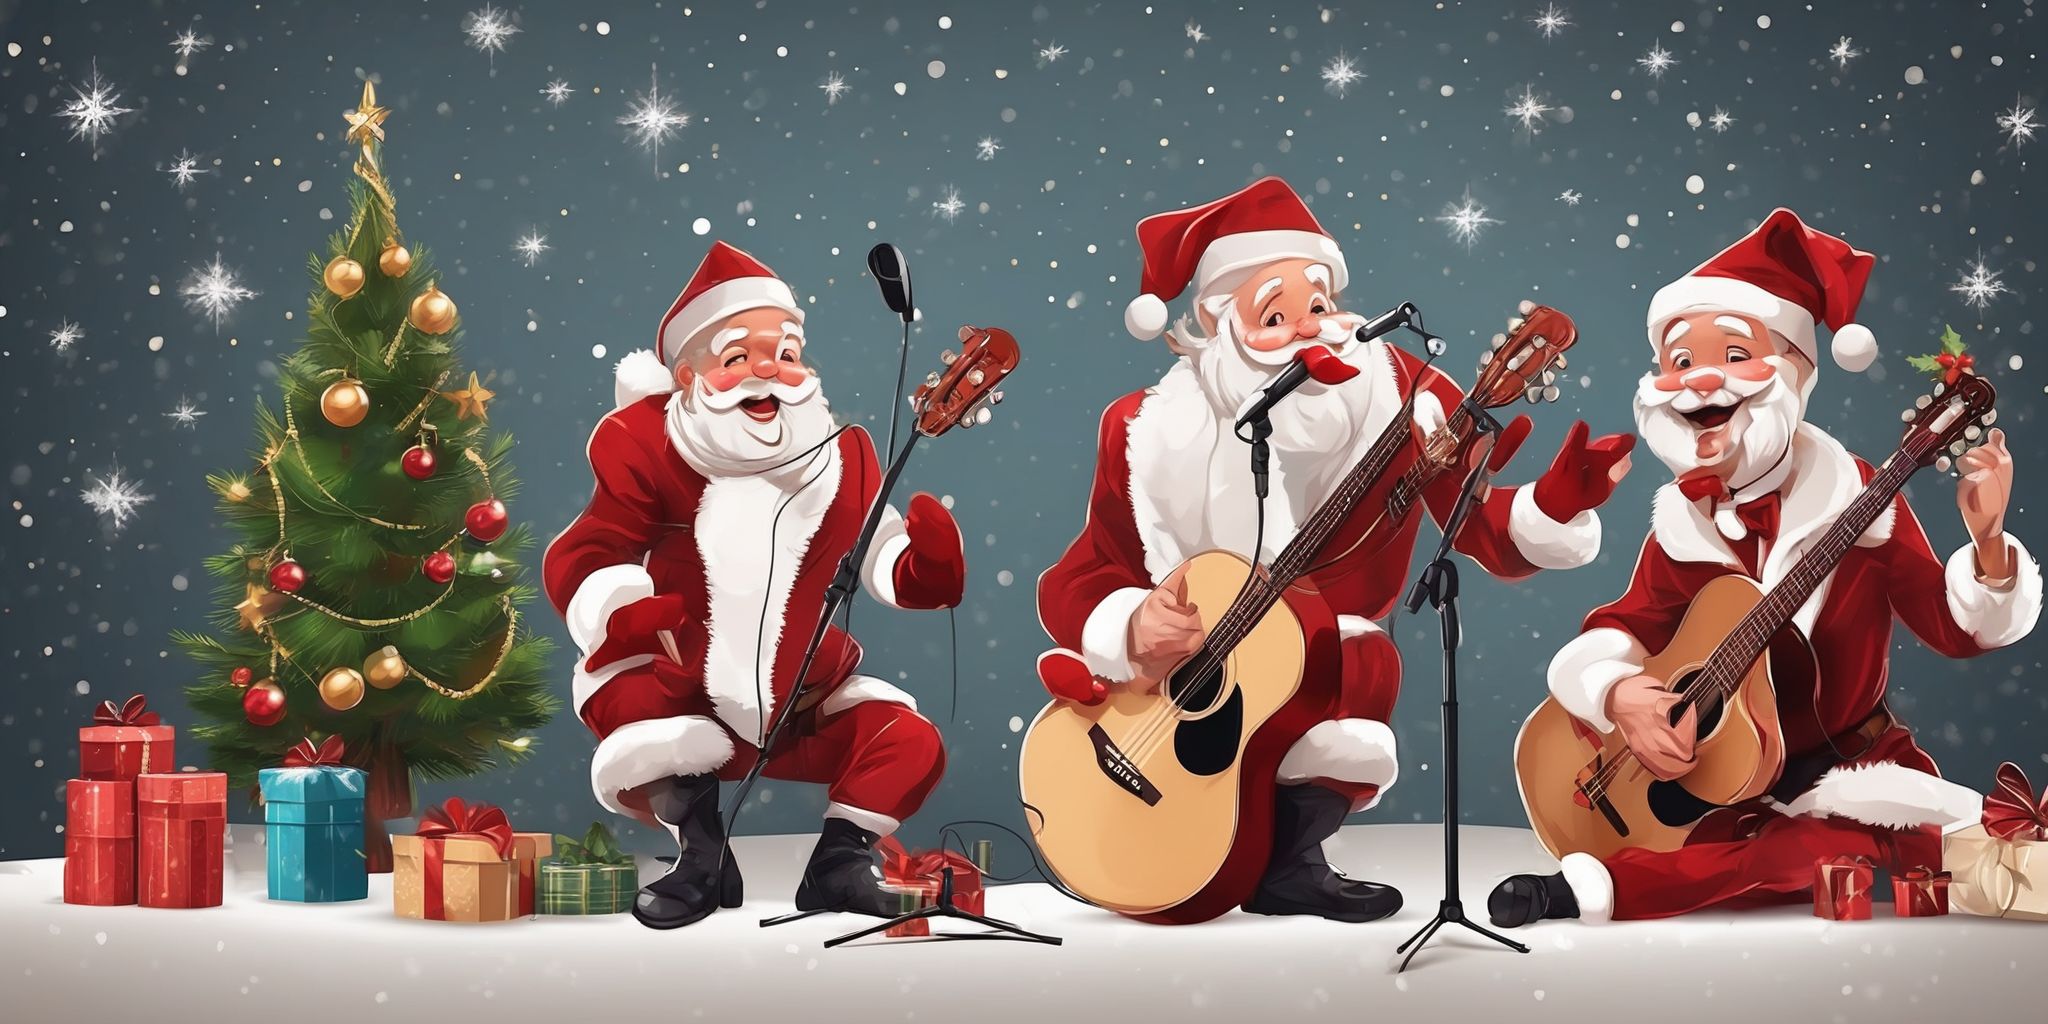 Crooners in realistic Christmas style